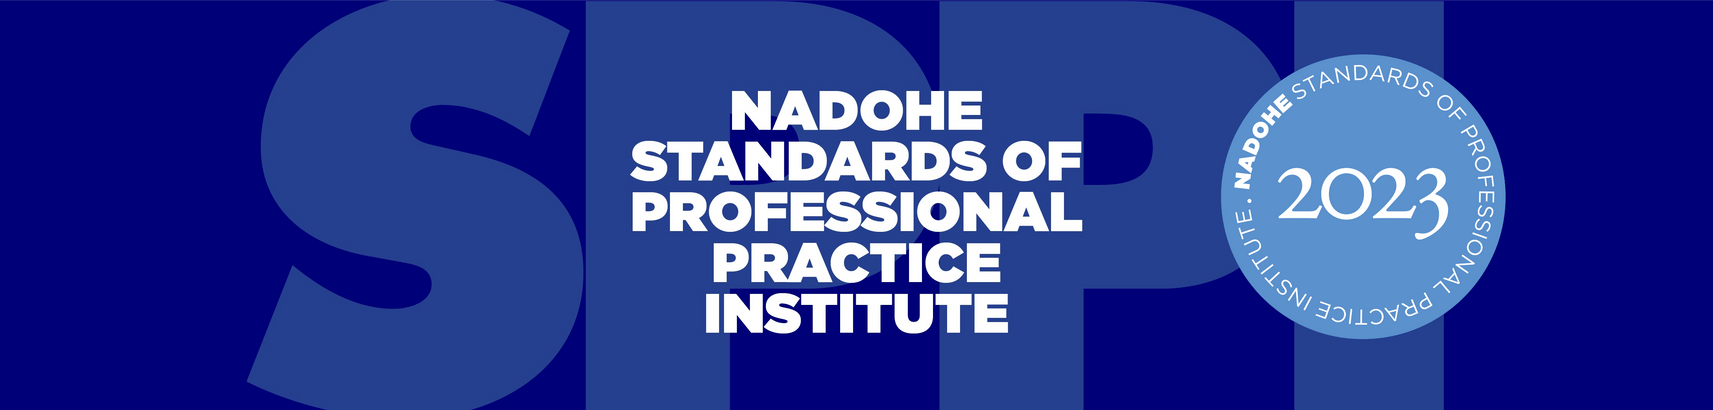 2023 NADOHE Standards of Professional Practice Institute